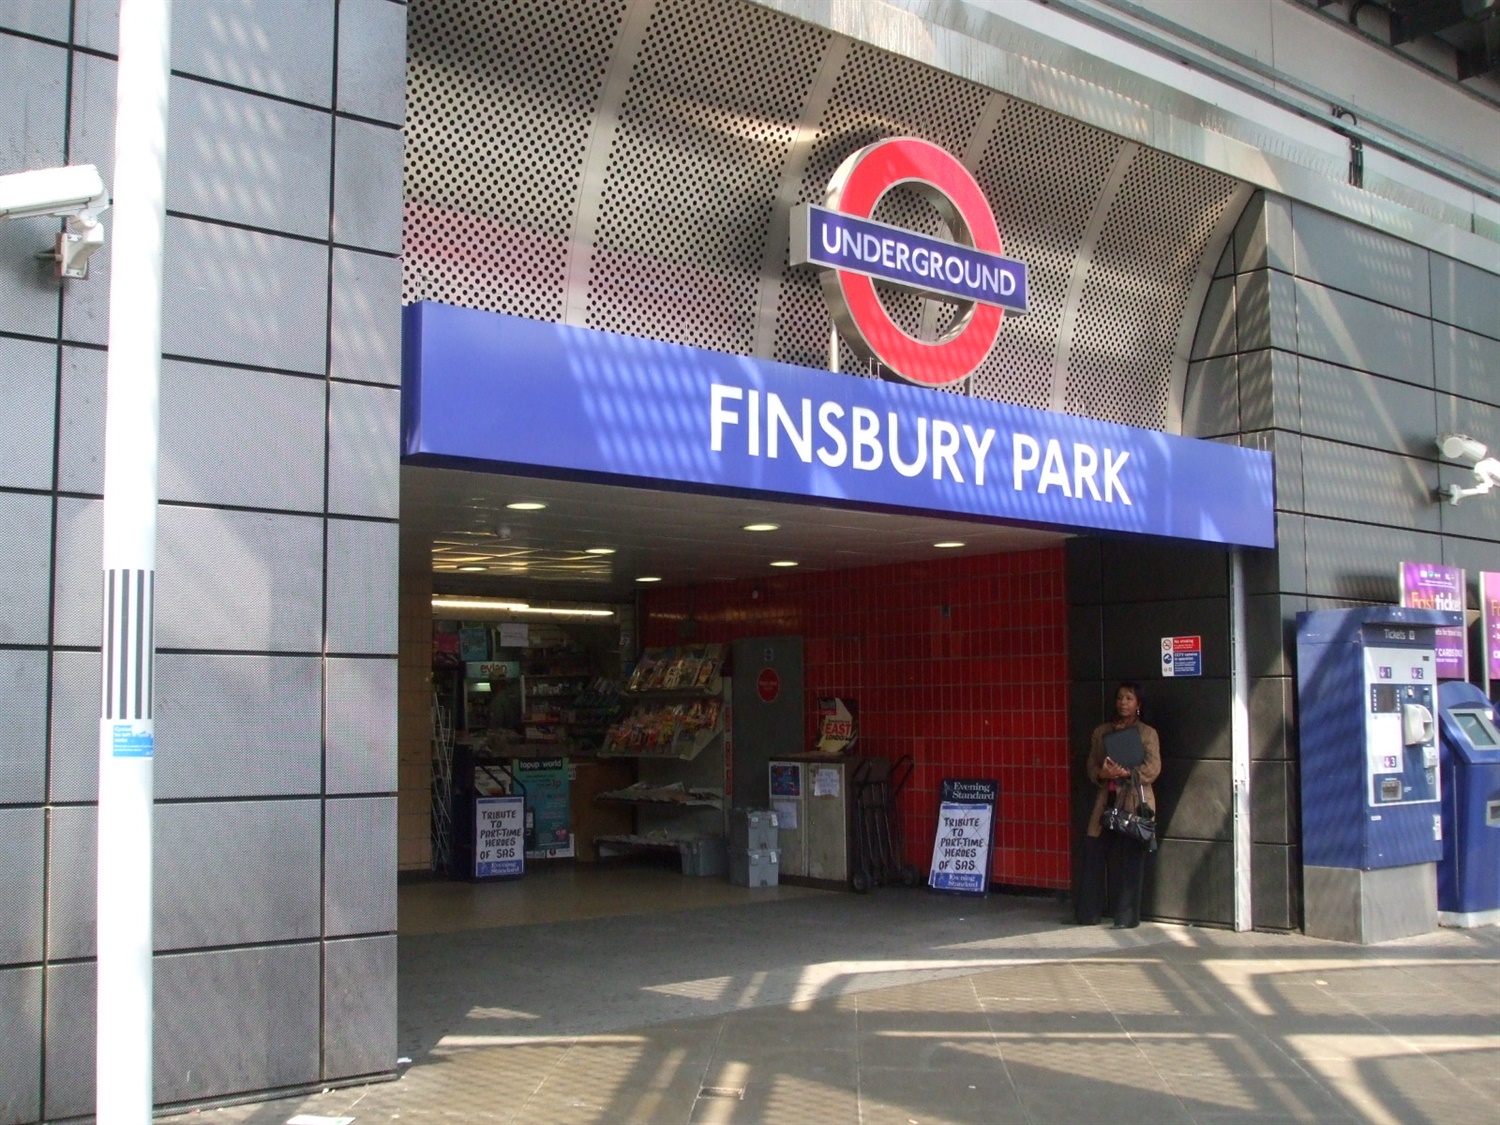 Work to begin on new entrance at Finsbury Park Underground station